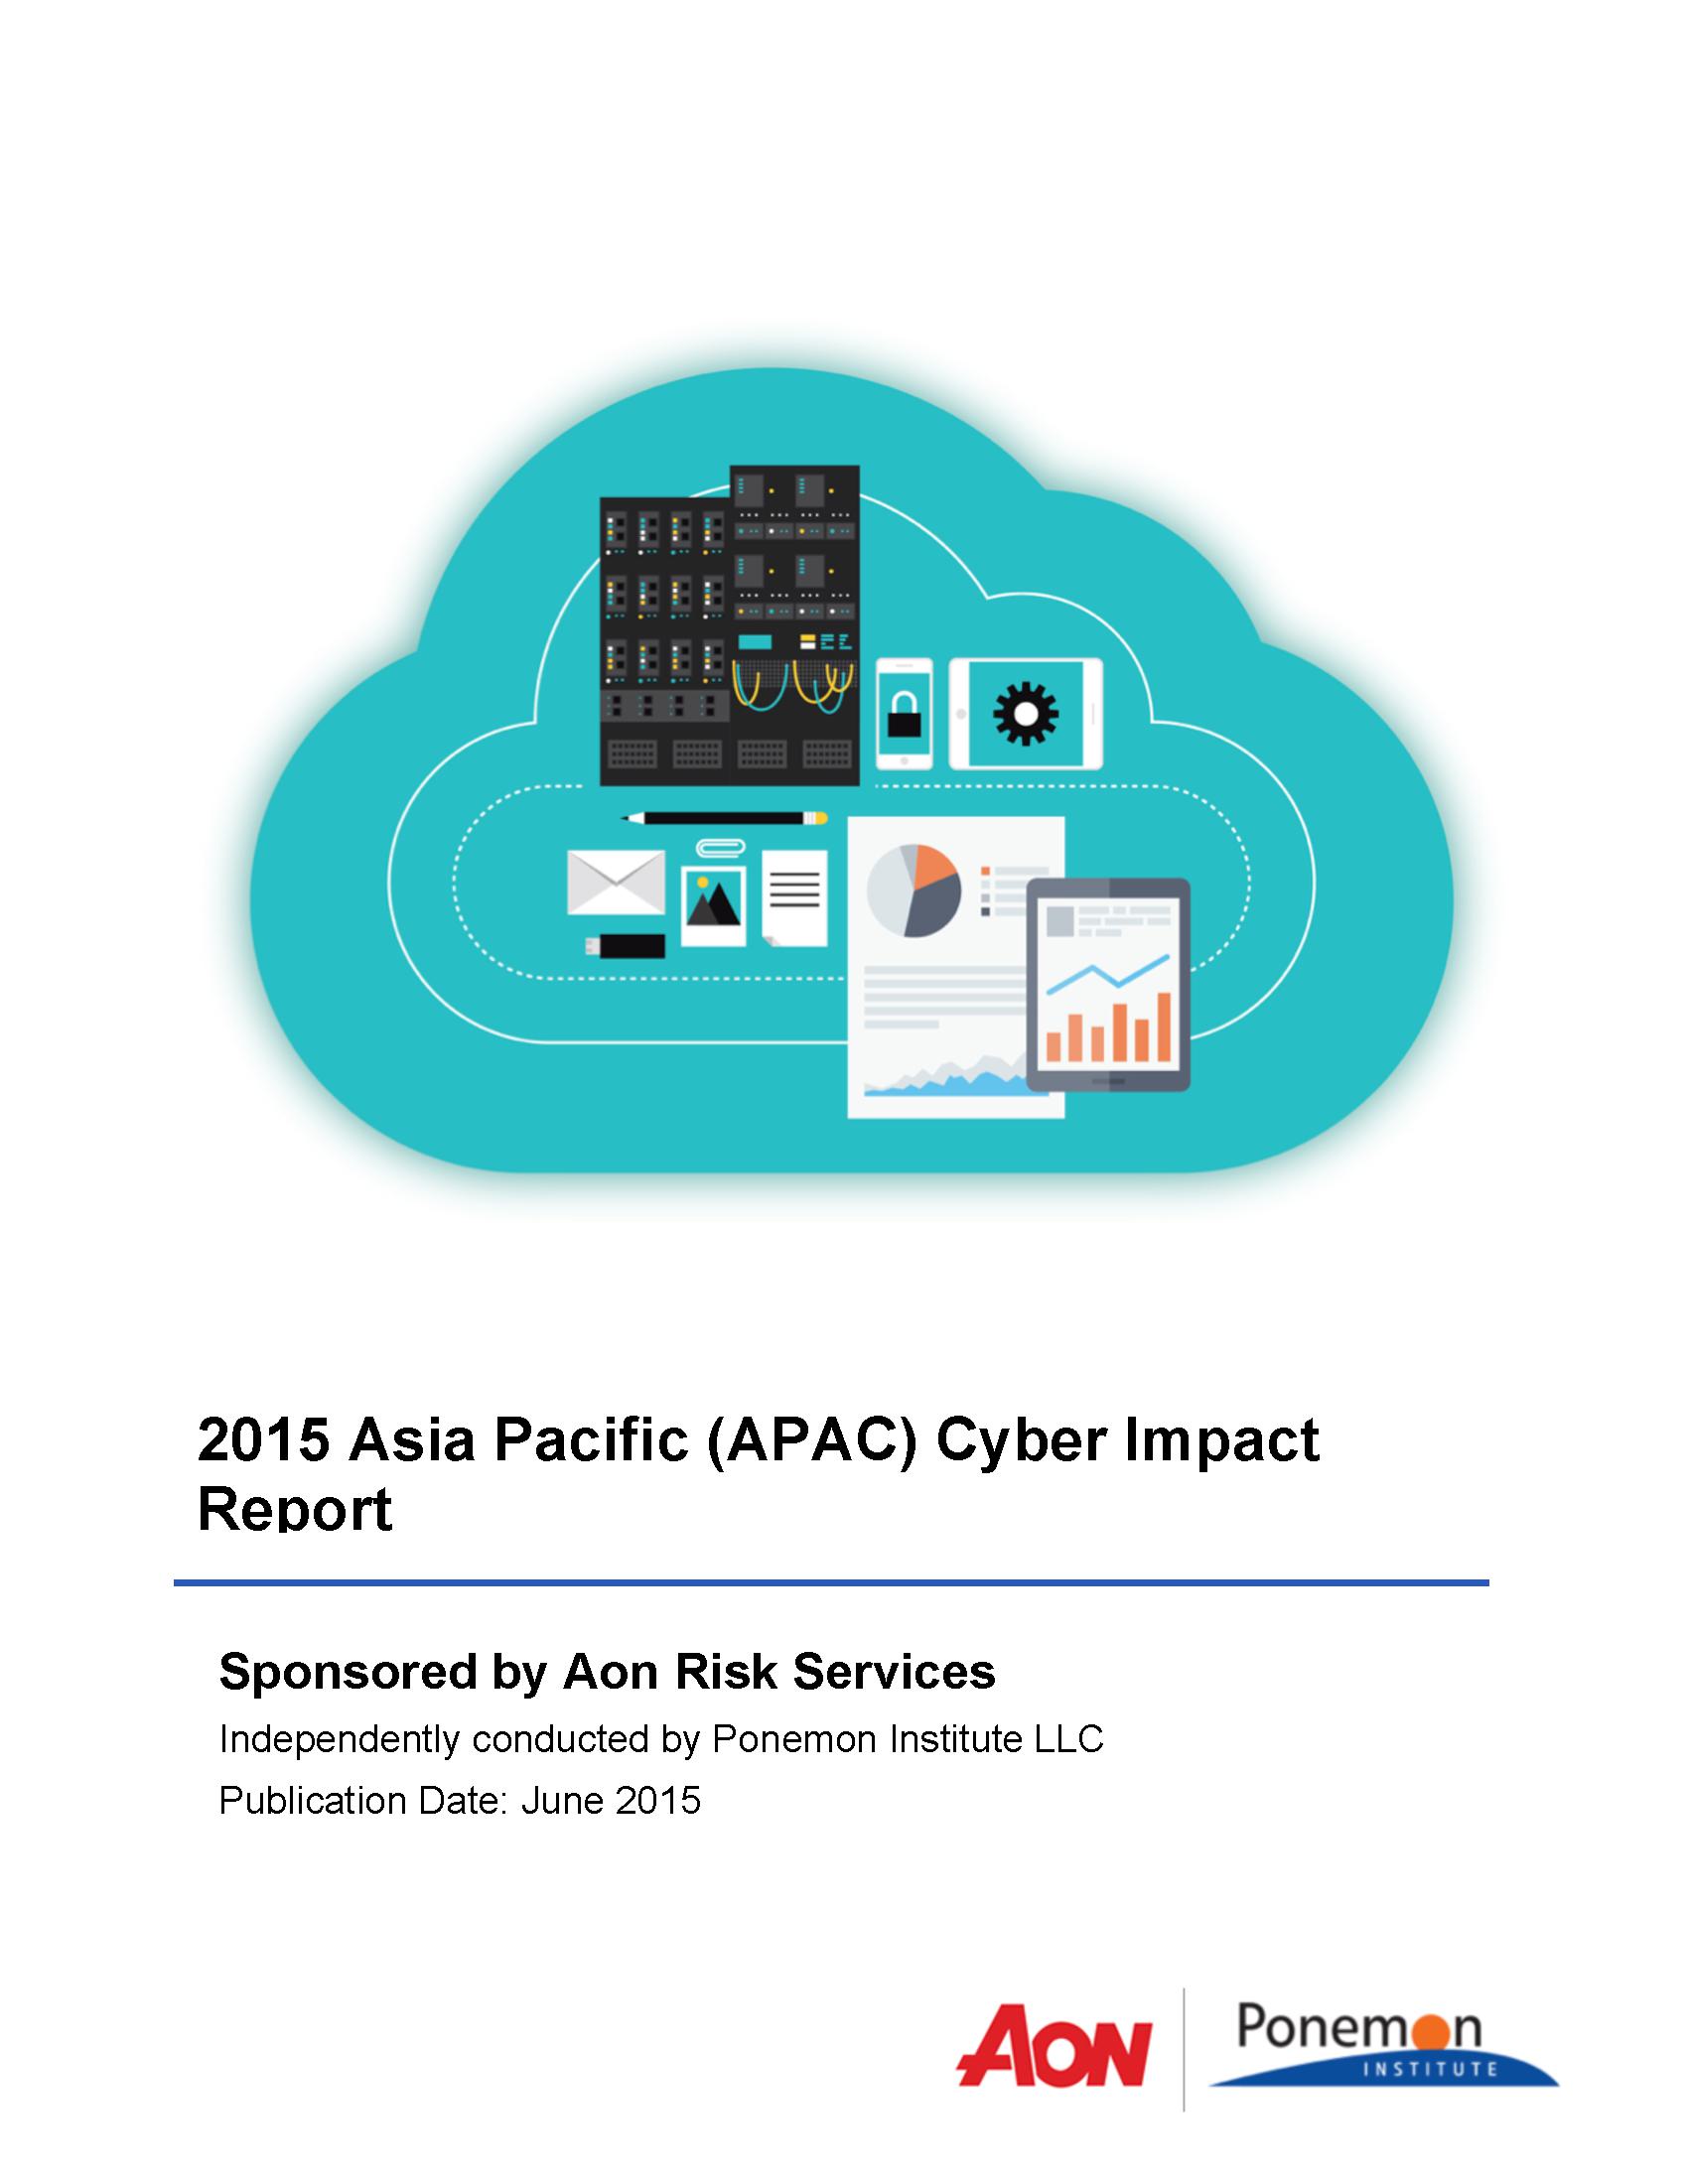 2015 Asia Pacific (APAC) Cyber Impact Report